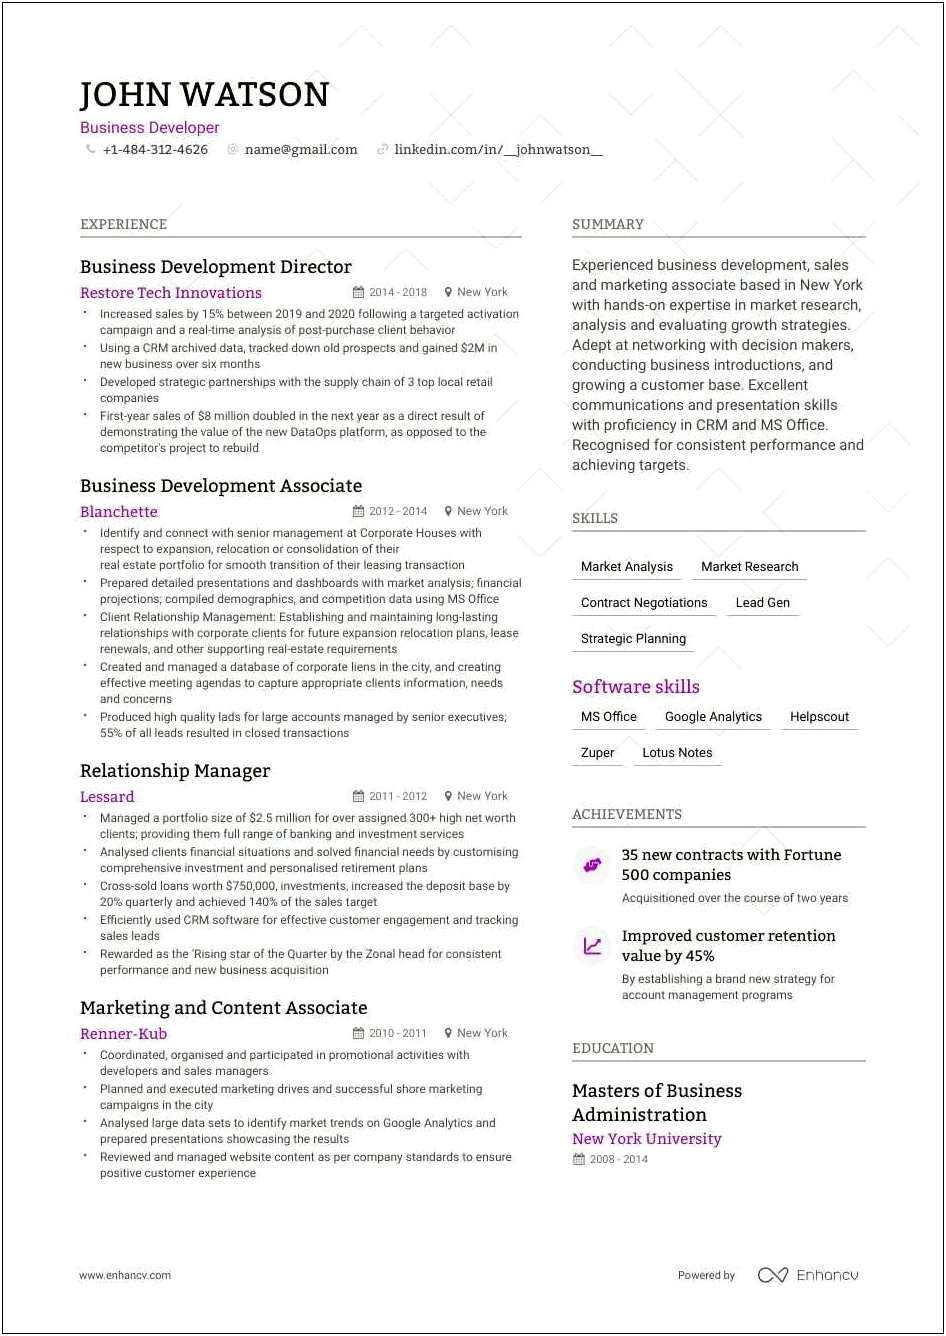 Difference Between Summary And Headline On Resume